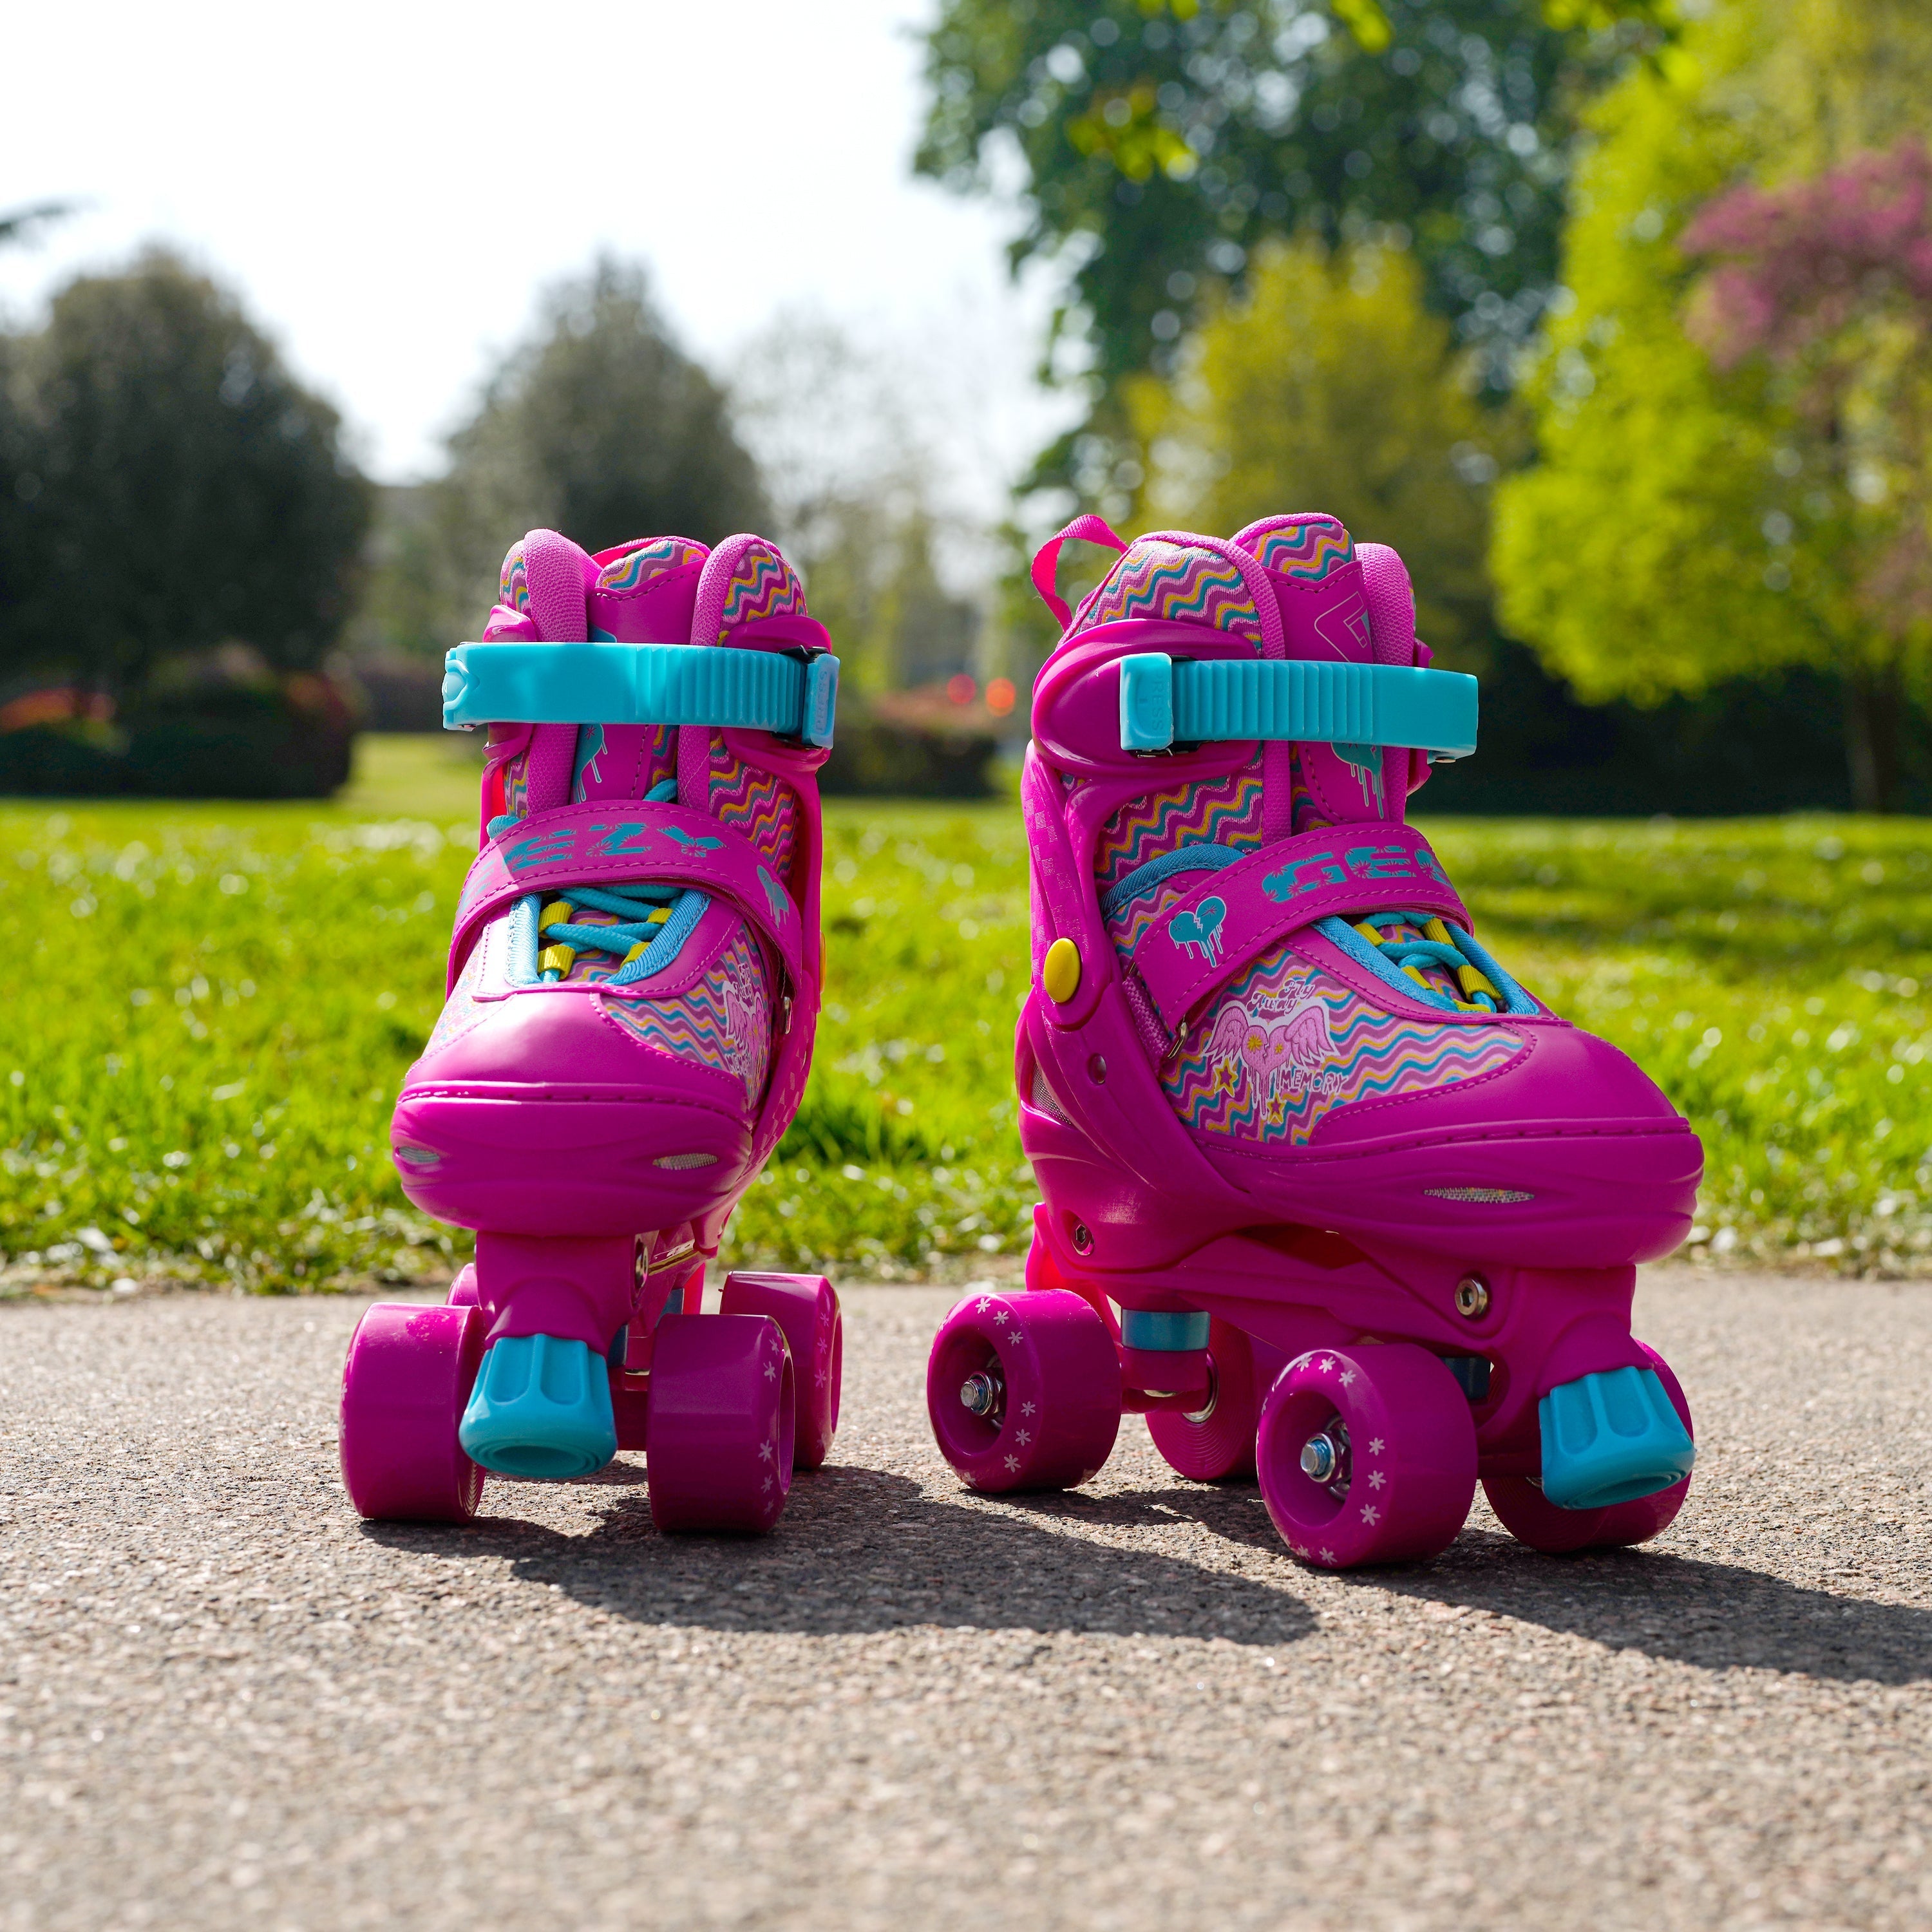 Large Pink Kids Roller Skates Boots The Magic Toy Shop - The Magic Toy Shop